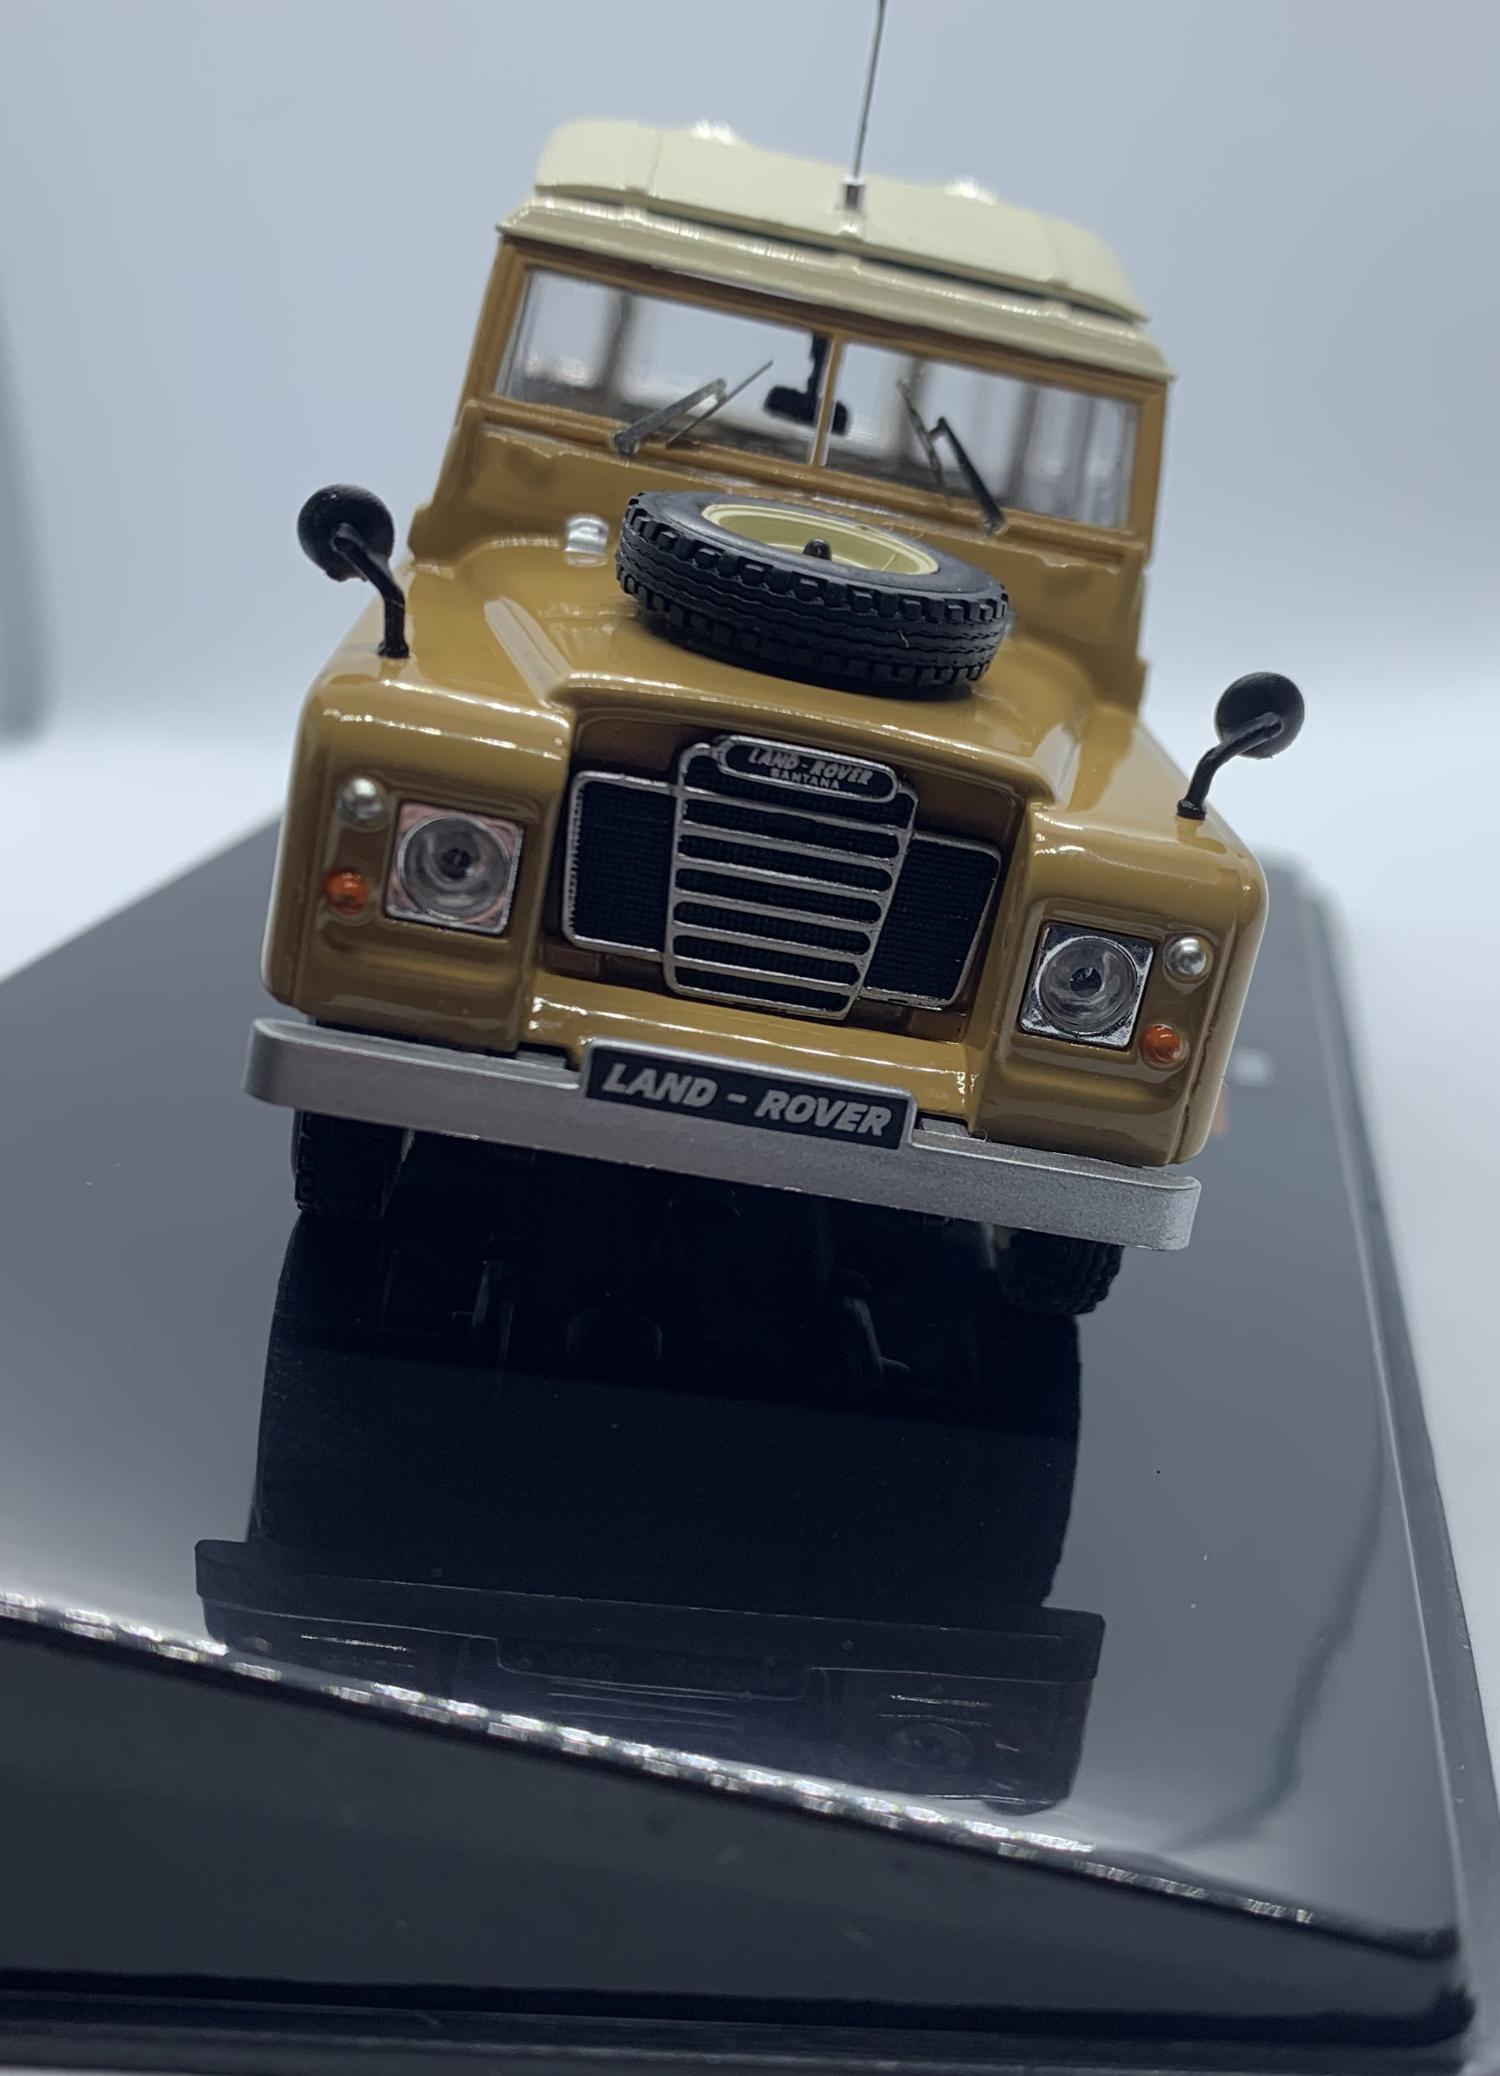 Land Rover Series 2 109 Station Wagon 1958 in beige, 1:43 scale model from IXO